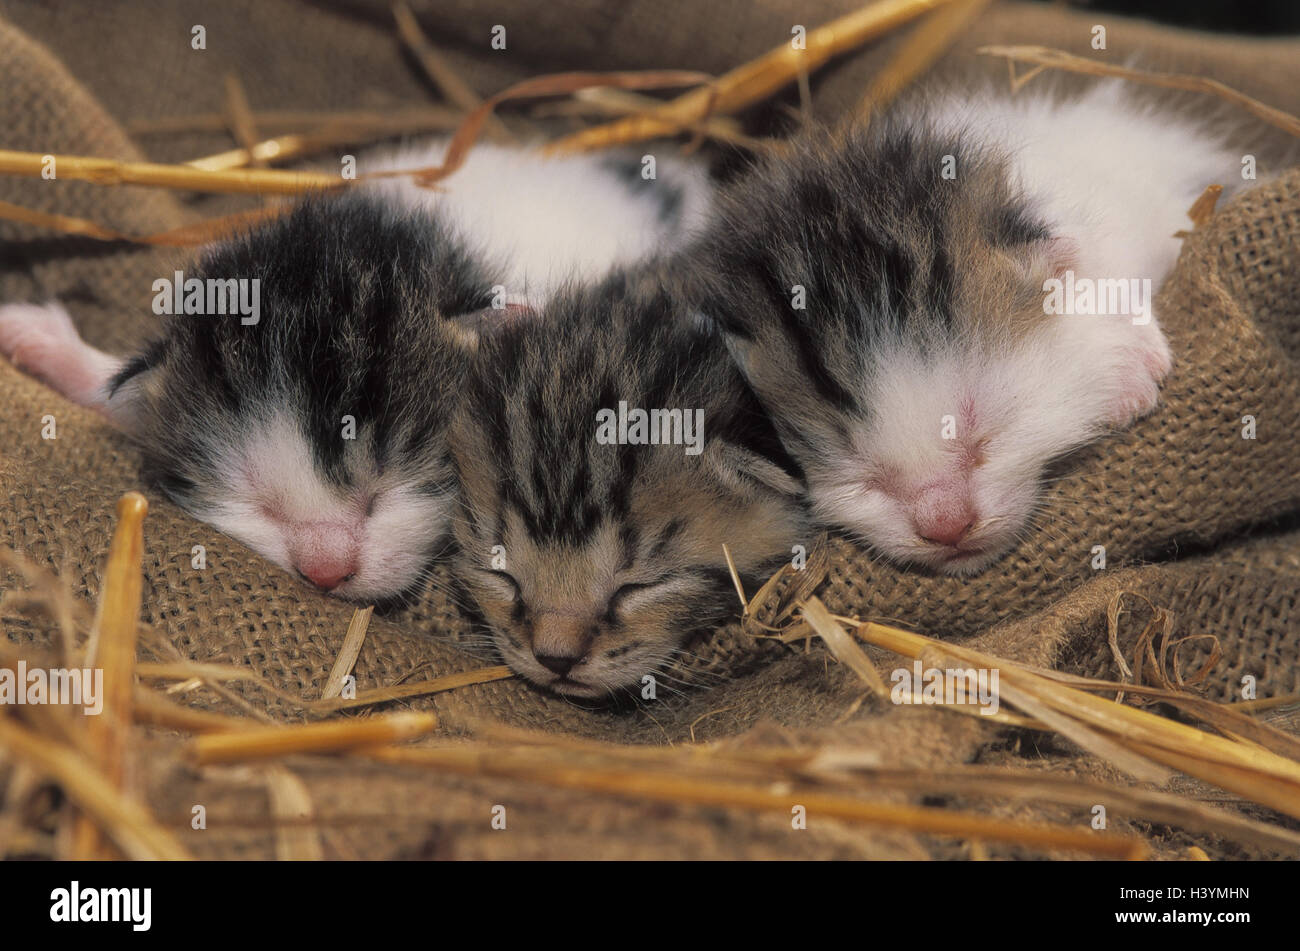 Jute pouch, straw, cat's babies, animals, pets, mammals, cat's children, three, house cats, young, young animals, animal babies, striped, sleep, eyes closed Stock Photo